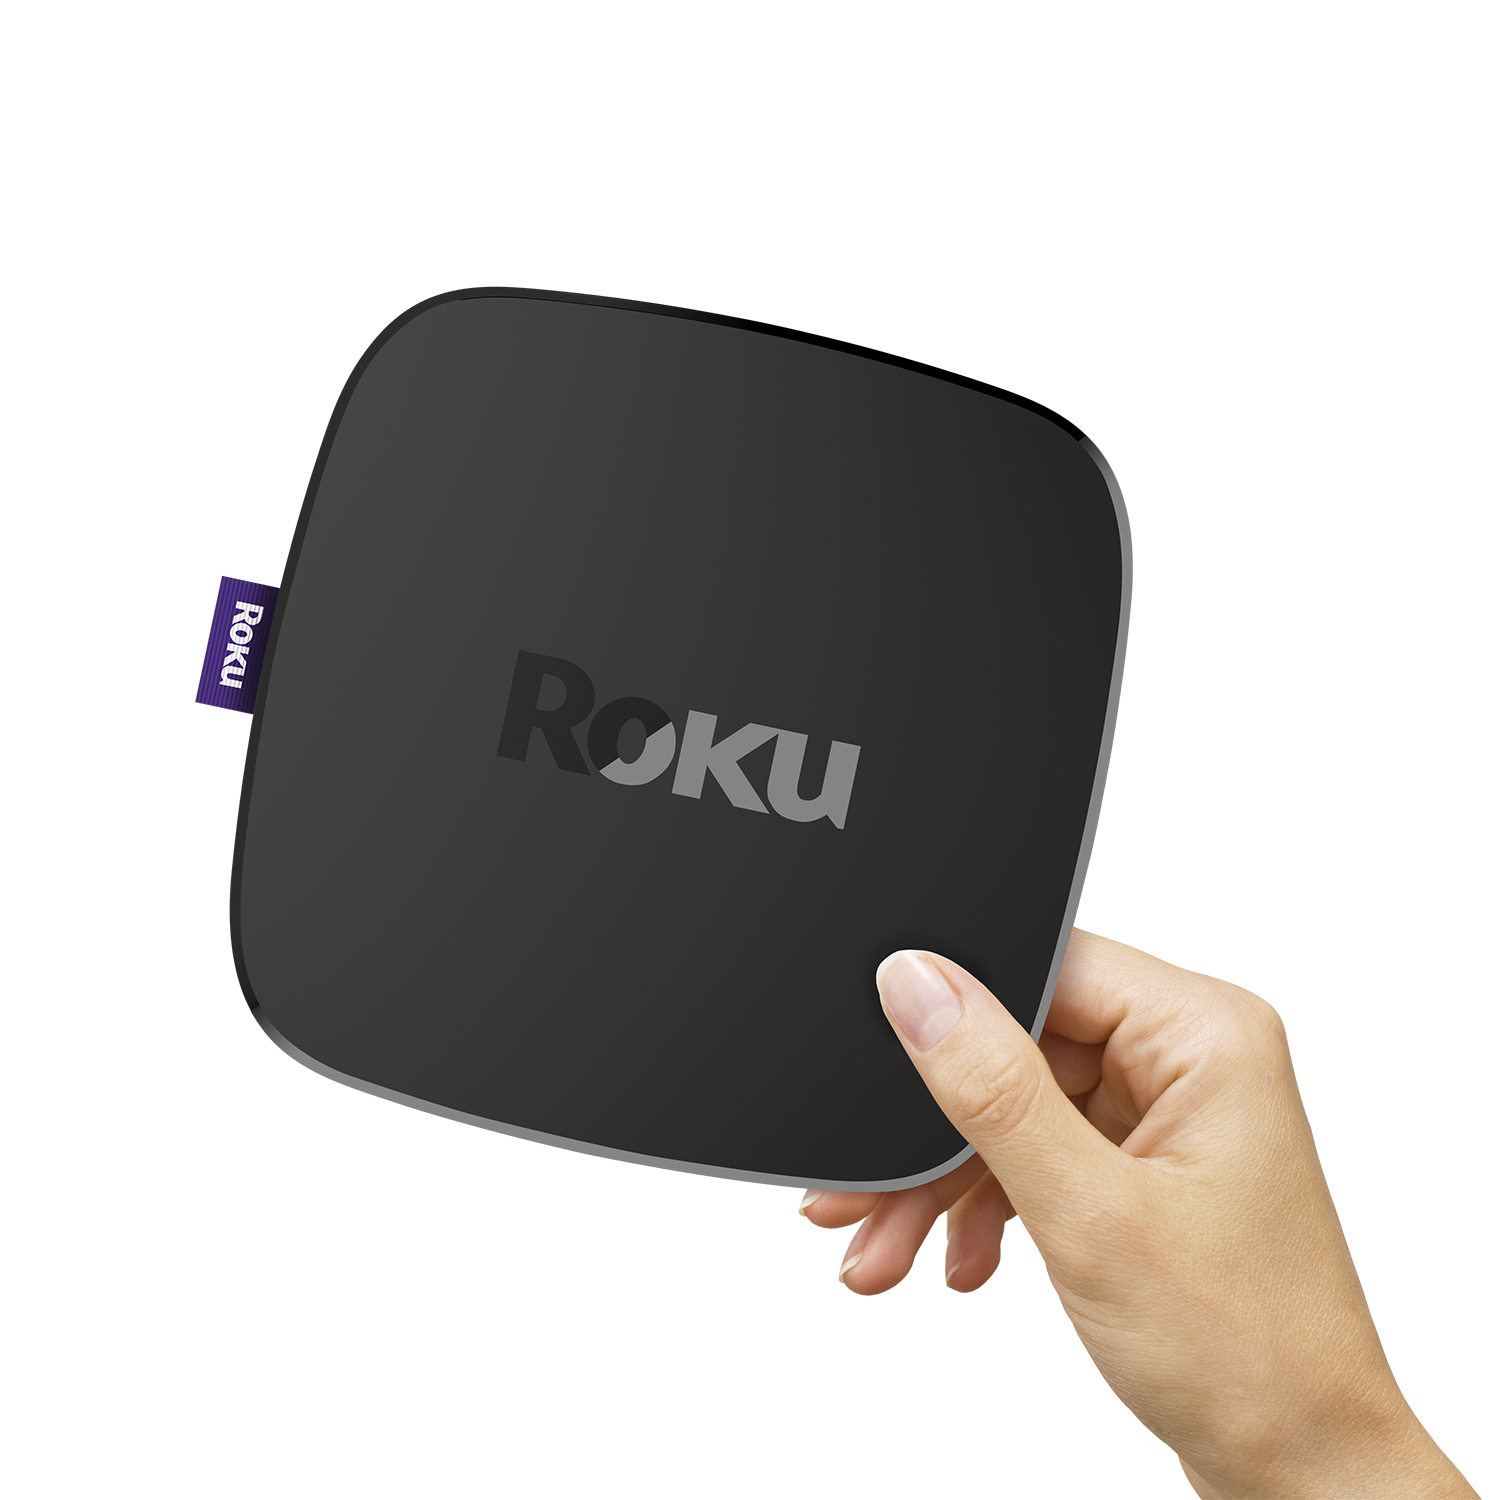 Roku Ultra 4K HDR Streaming Player (2018) with JBL headphones - image 4 of 7